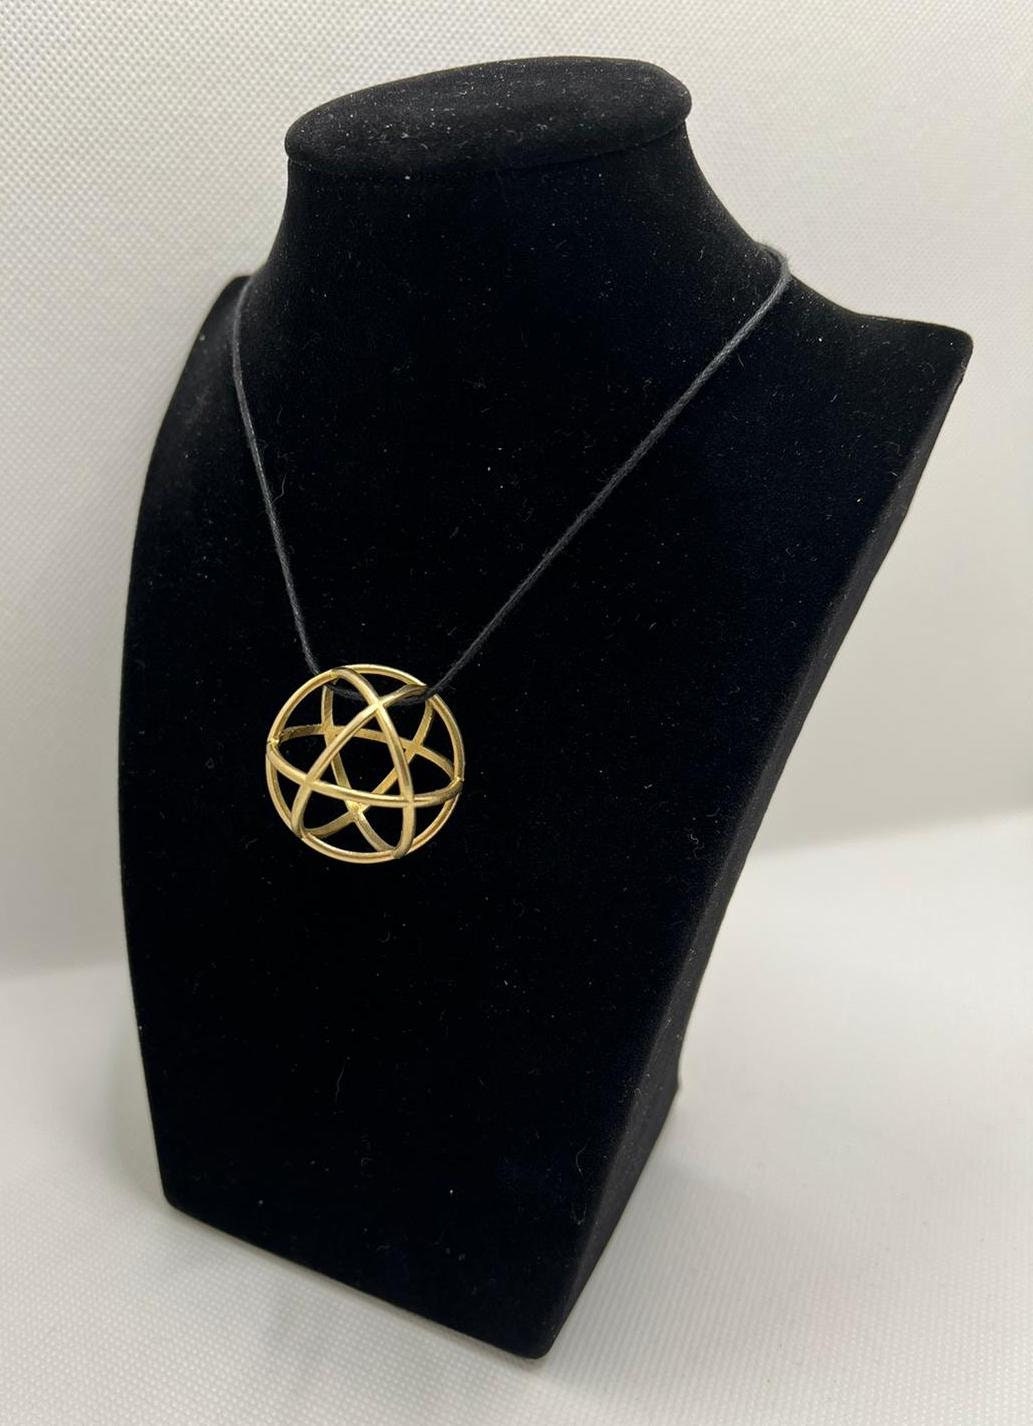 Gold Plated Genesa Crystal Pendant 31 Mm in Diameter: Bronze Alloy and  Brass 